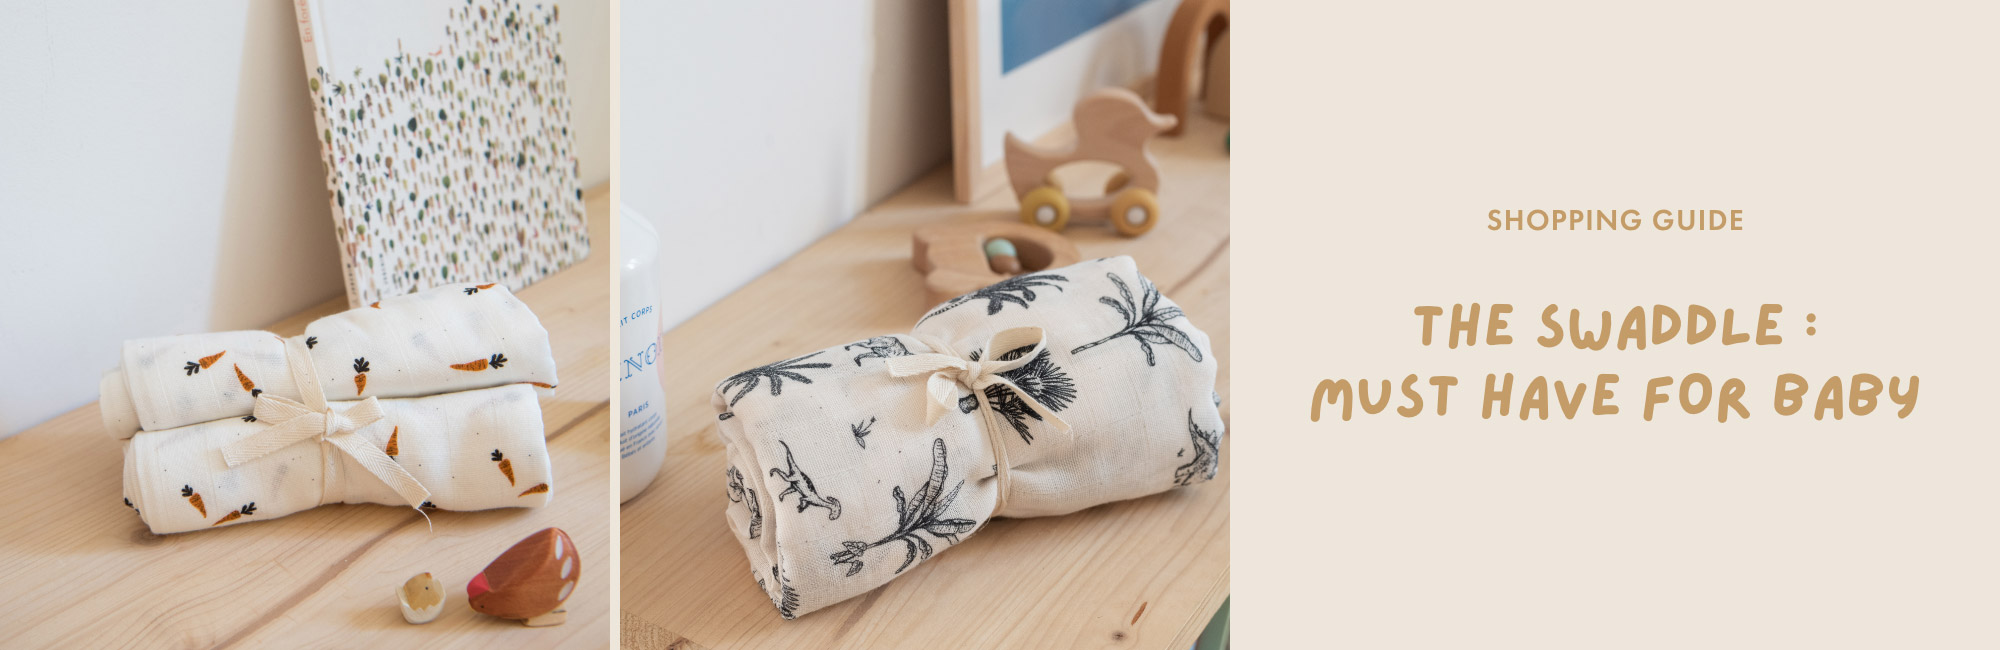 Baby swaddles : a must have